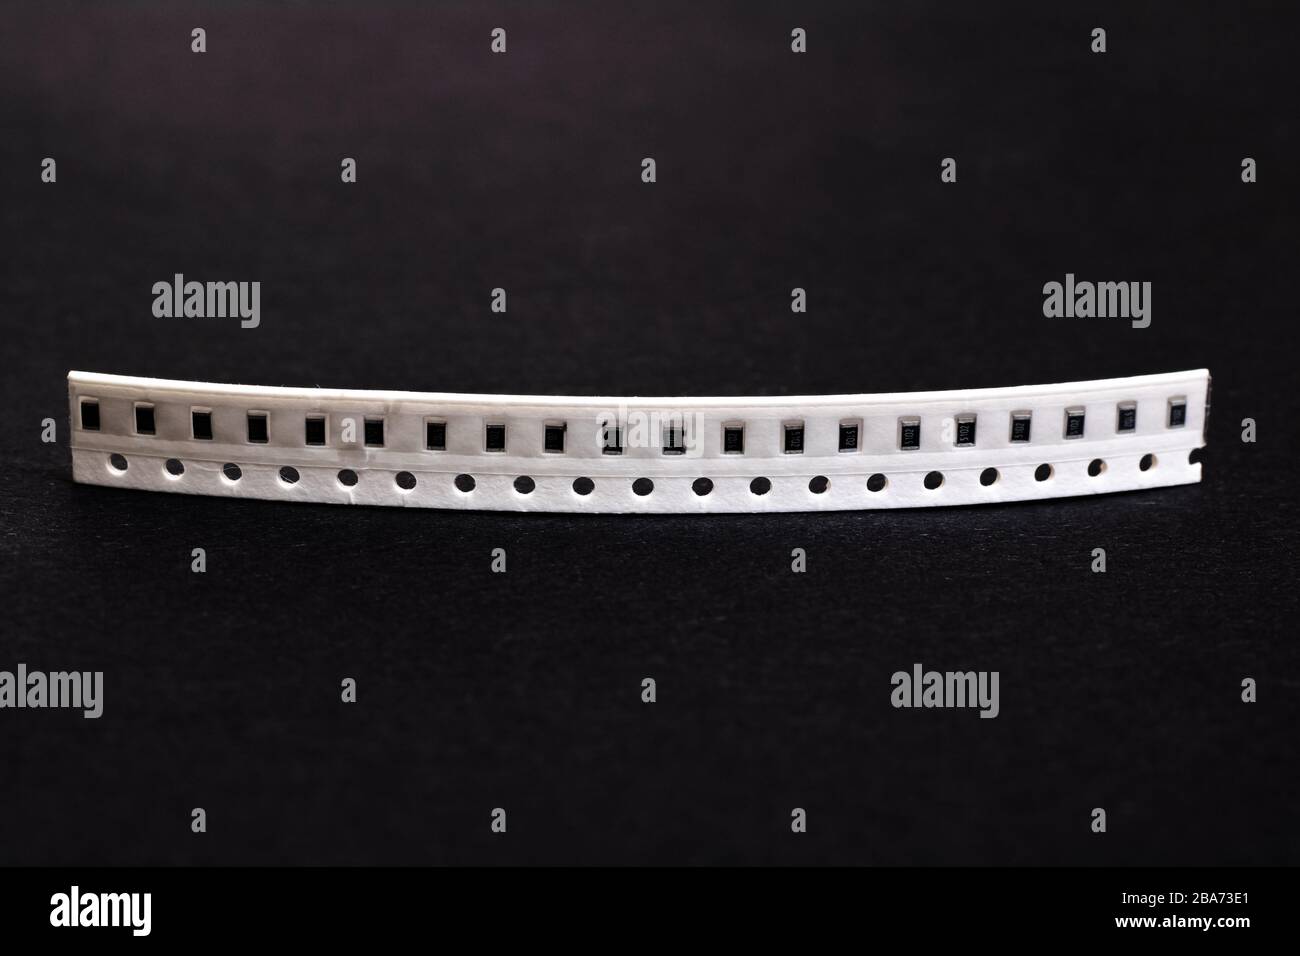 Tape of smd chip 0805 resistors close up Stock Photo